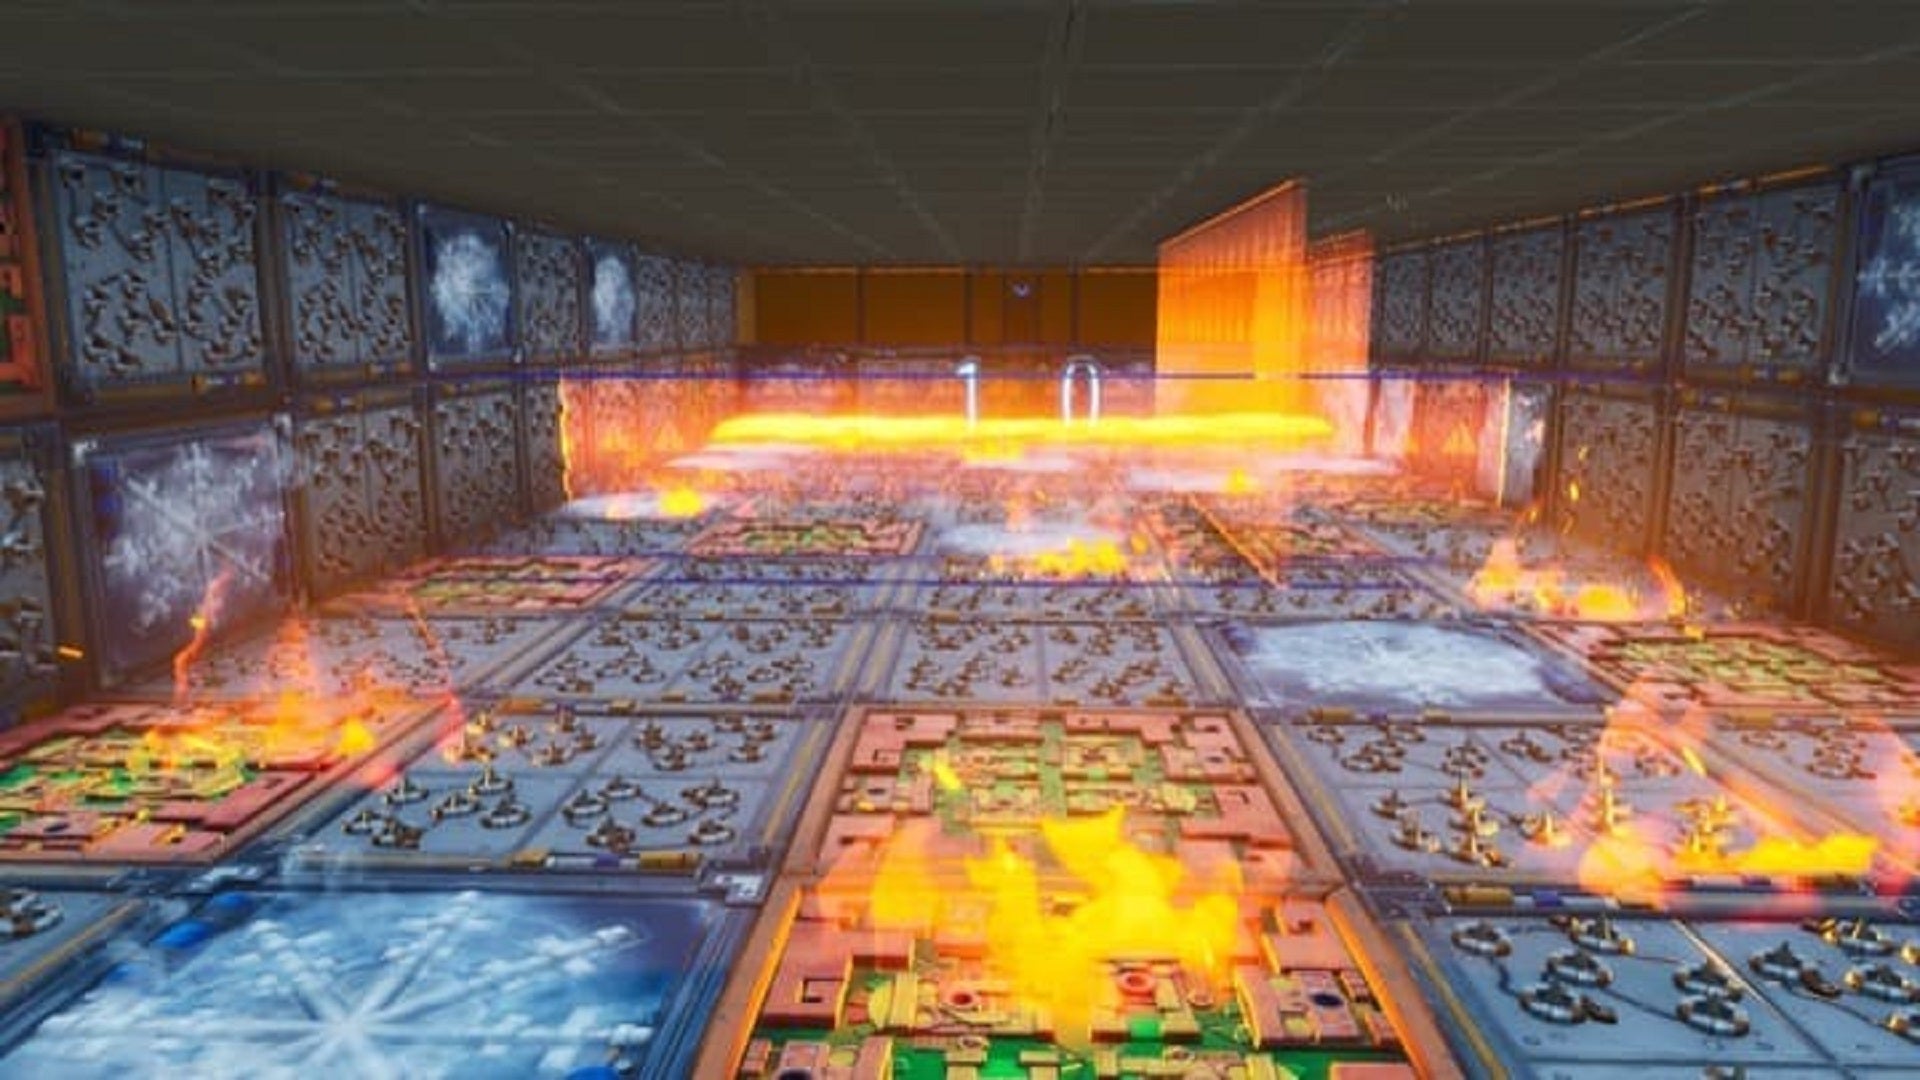 A dungeon room filled with flames, spike traps, and other hazards.